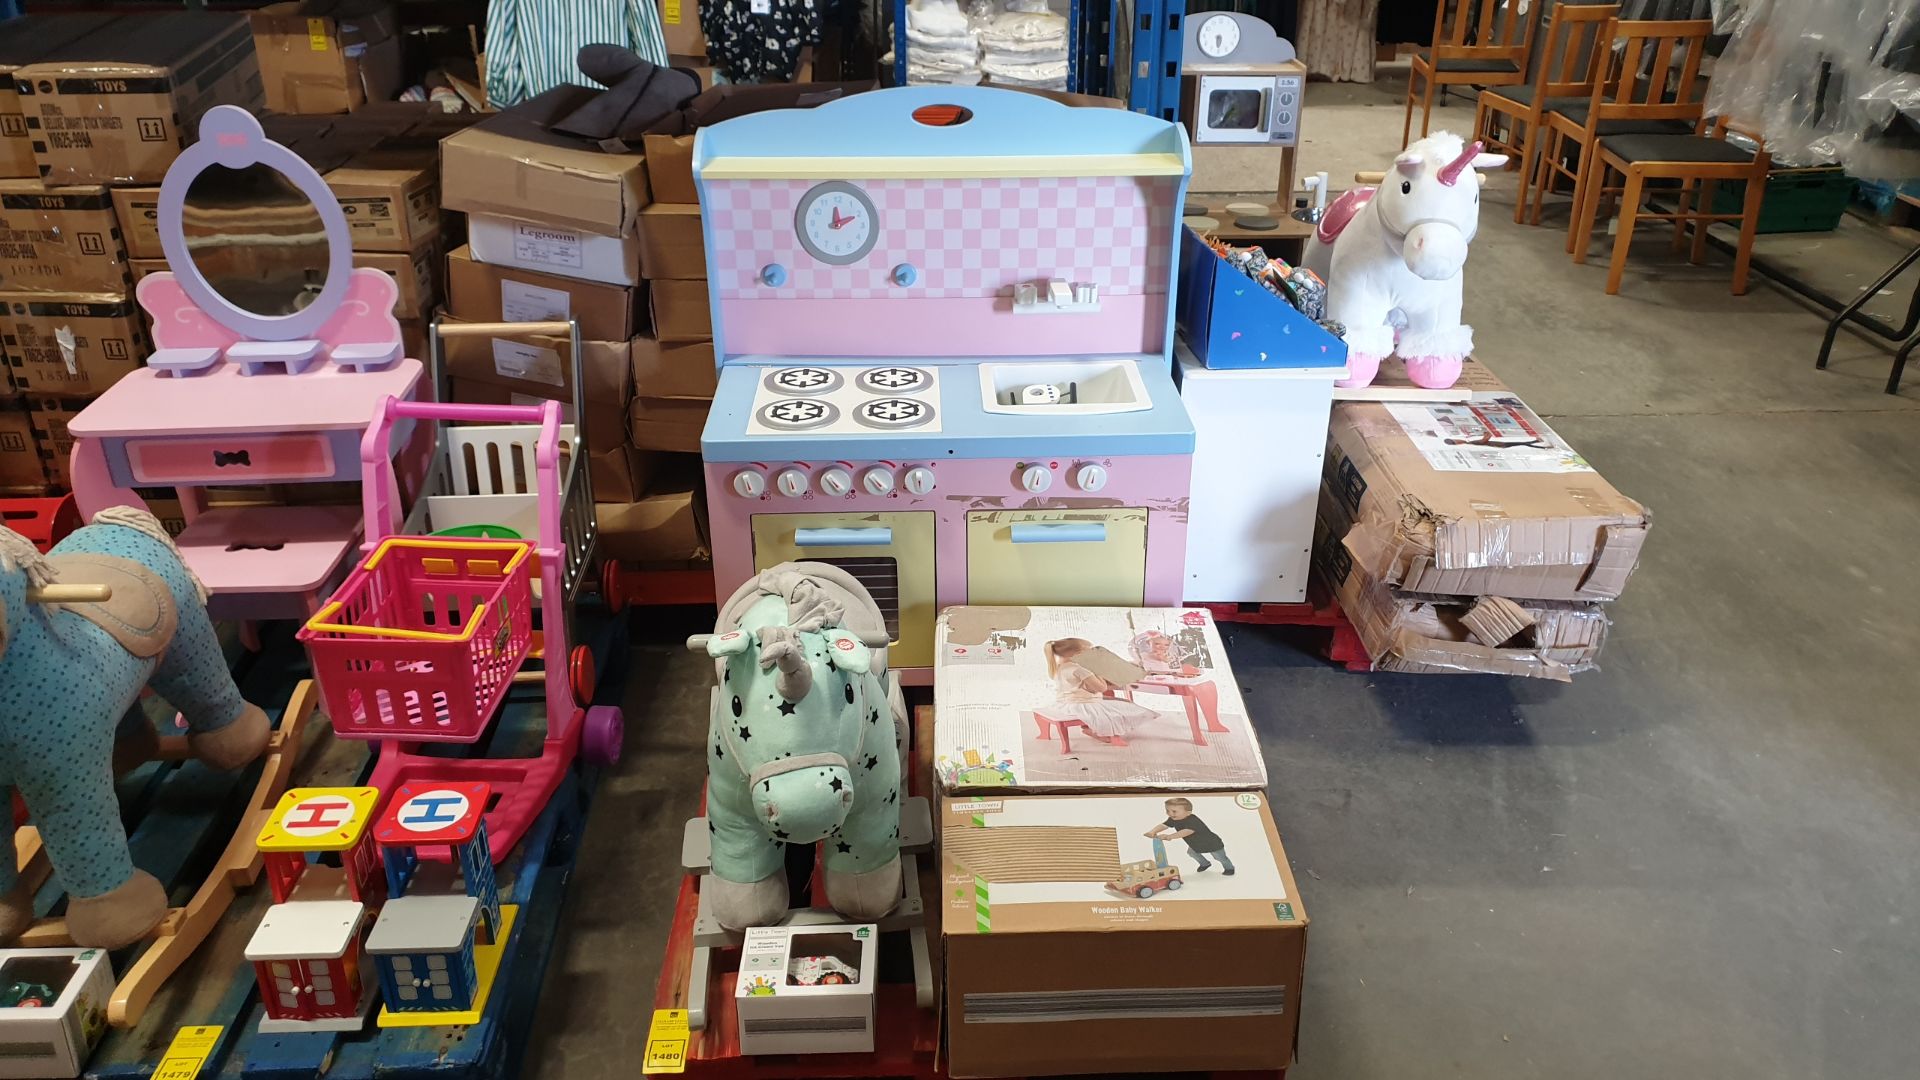 (LOT FOR THURSDAY 28TH MAY AUCTION) PALLET CONTAINING KIDS KITCHEN WITH OVEN GRILL SINK TAPS